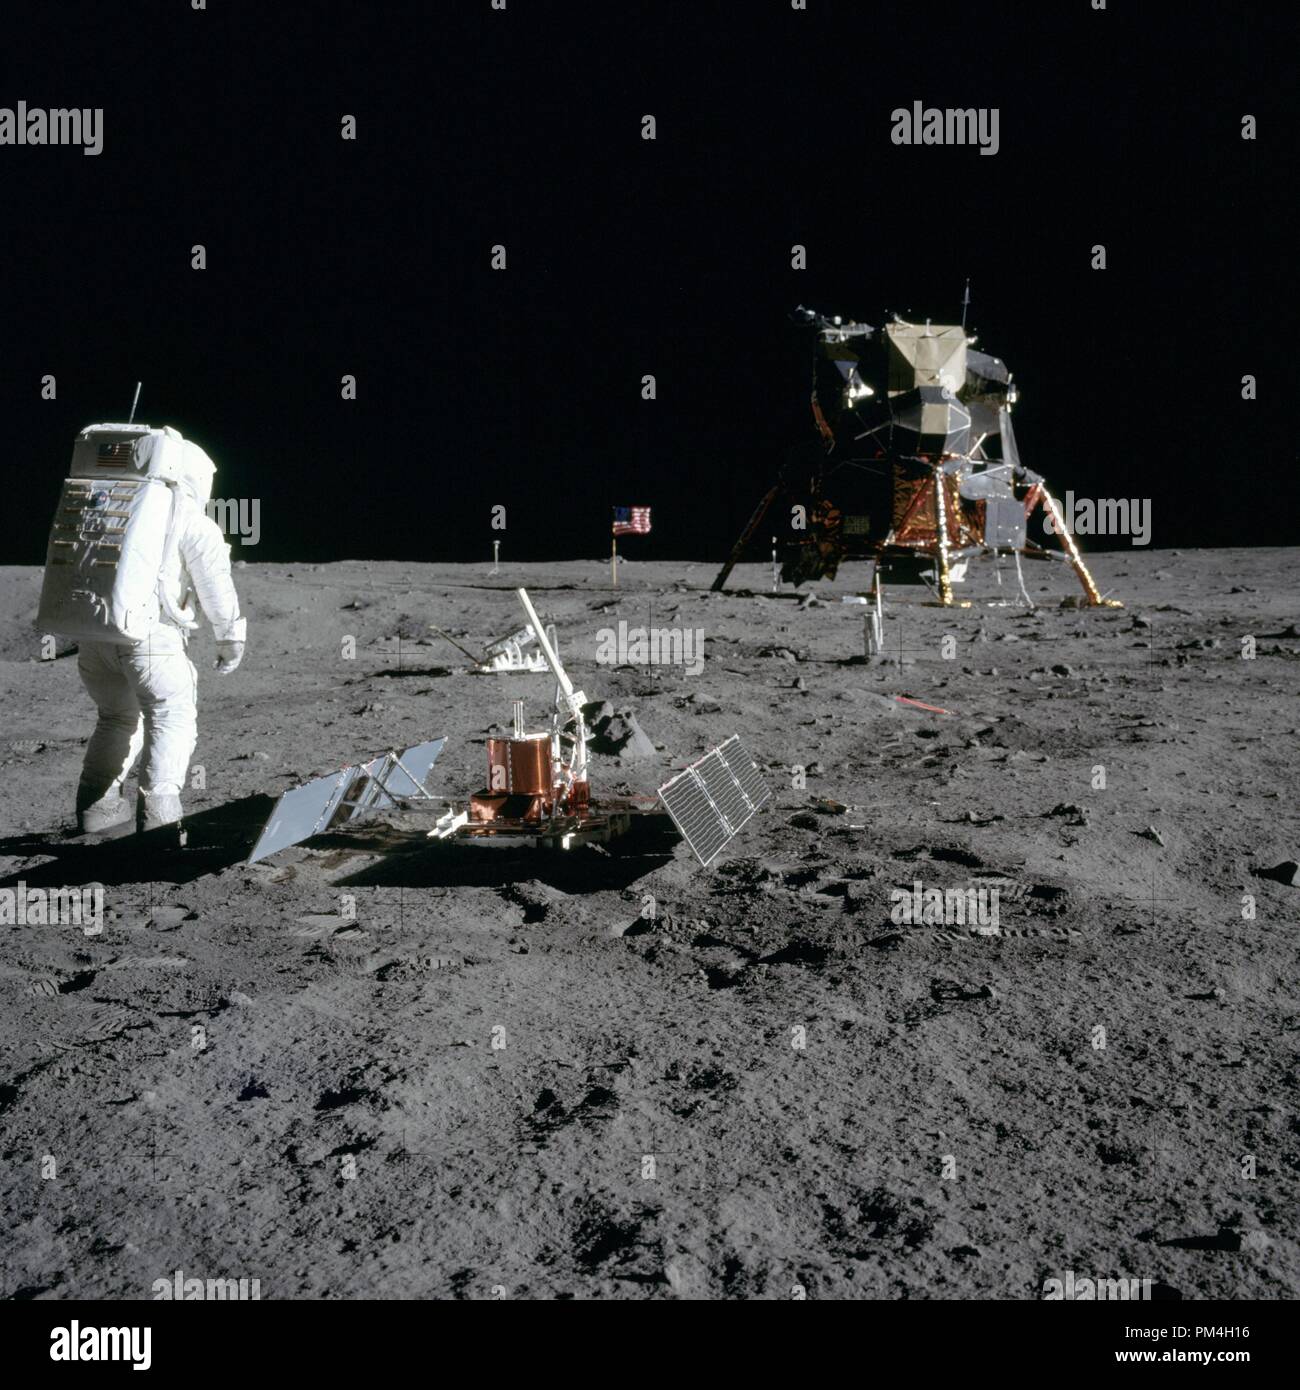 (20 July 1969) --- Astronaut Edwin E. Aldrin Jr., lunar module pilot, is photographed during the Apollo 11 extravehicular activity (EVA) on the moon. He has just deployed the Early Apollo Scientific Experiments Package (EASEP). This is a good view of the deployed equipment. In the foreground is the Passive Seismic Experiment Package (PSEP); beyond it is the Laser Ranging Retro-Reflector (LR-3); in the center background is the United States flag; in the left background is the black and white lunar surface television camera; in the far right background is the Lunar Module (LM). Astronaut Neil A. Stock Photo